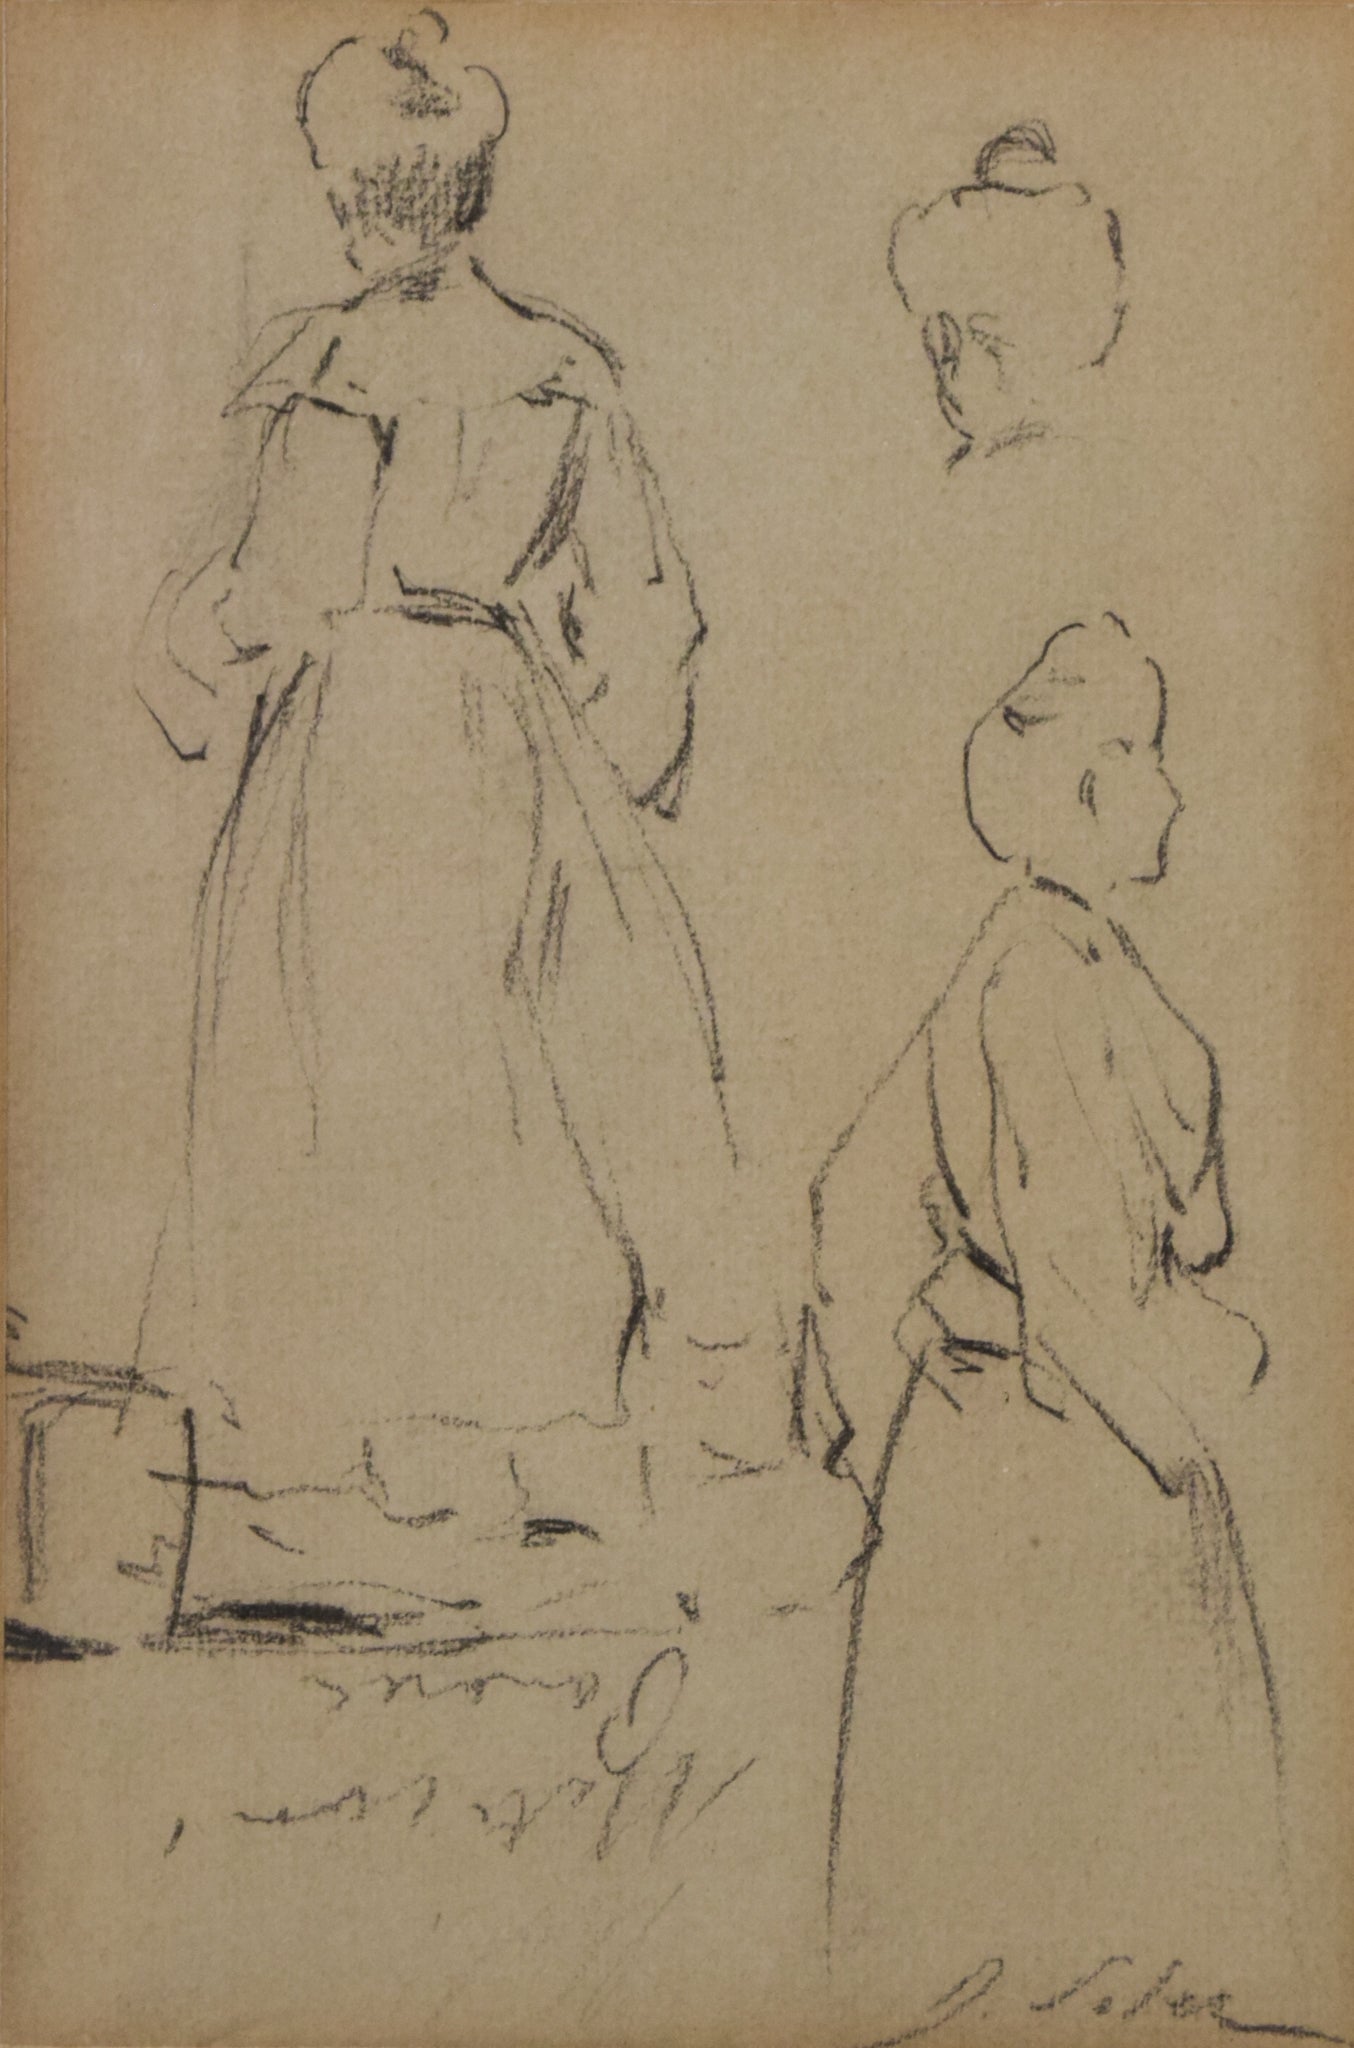 Double-sided sketches of Fin de siècle Ladies